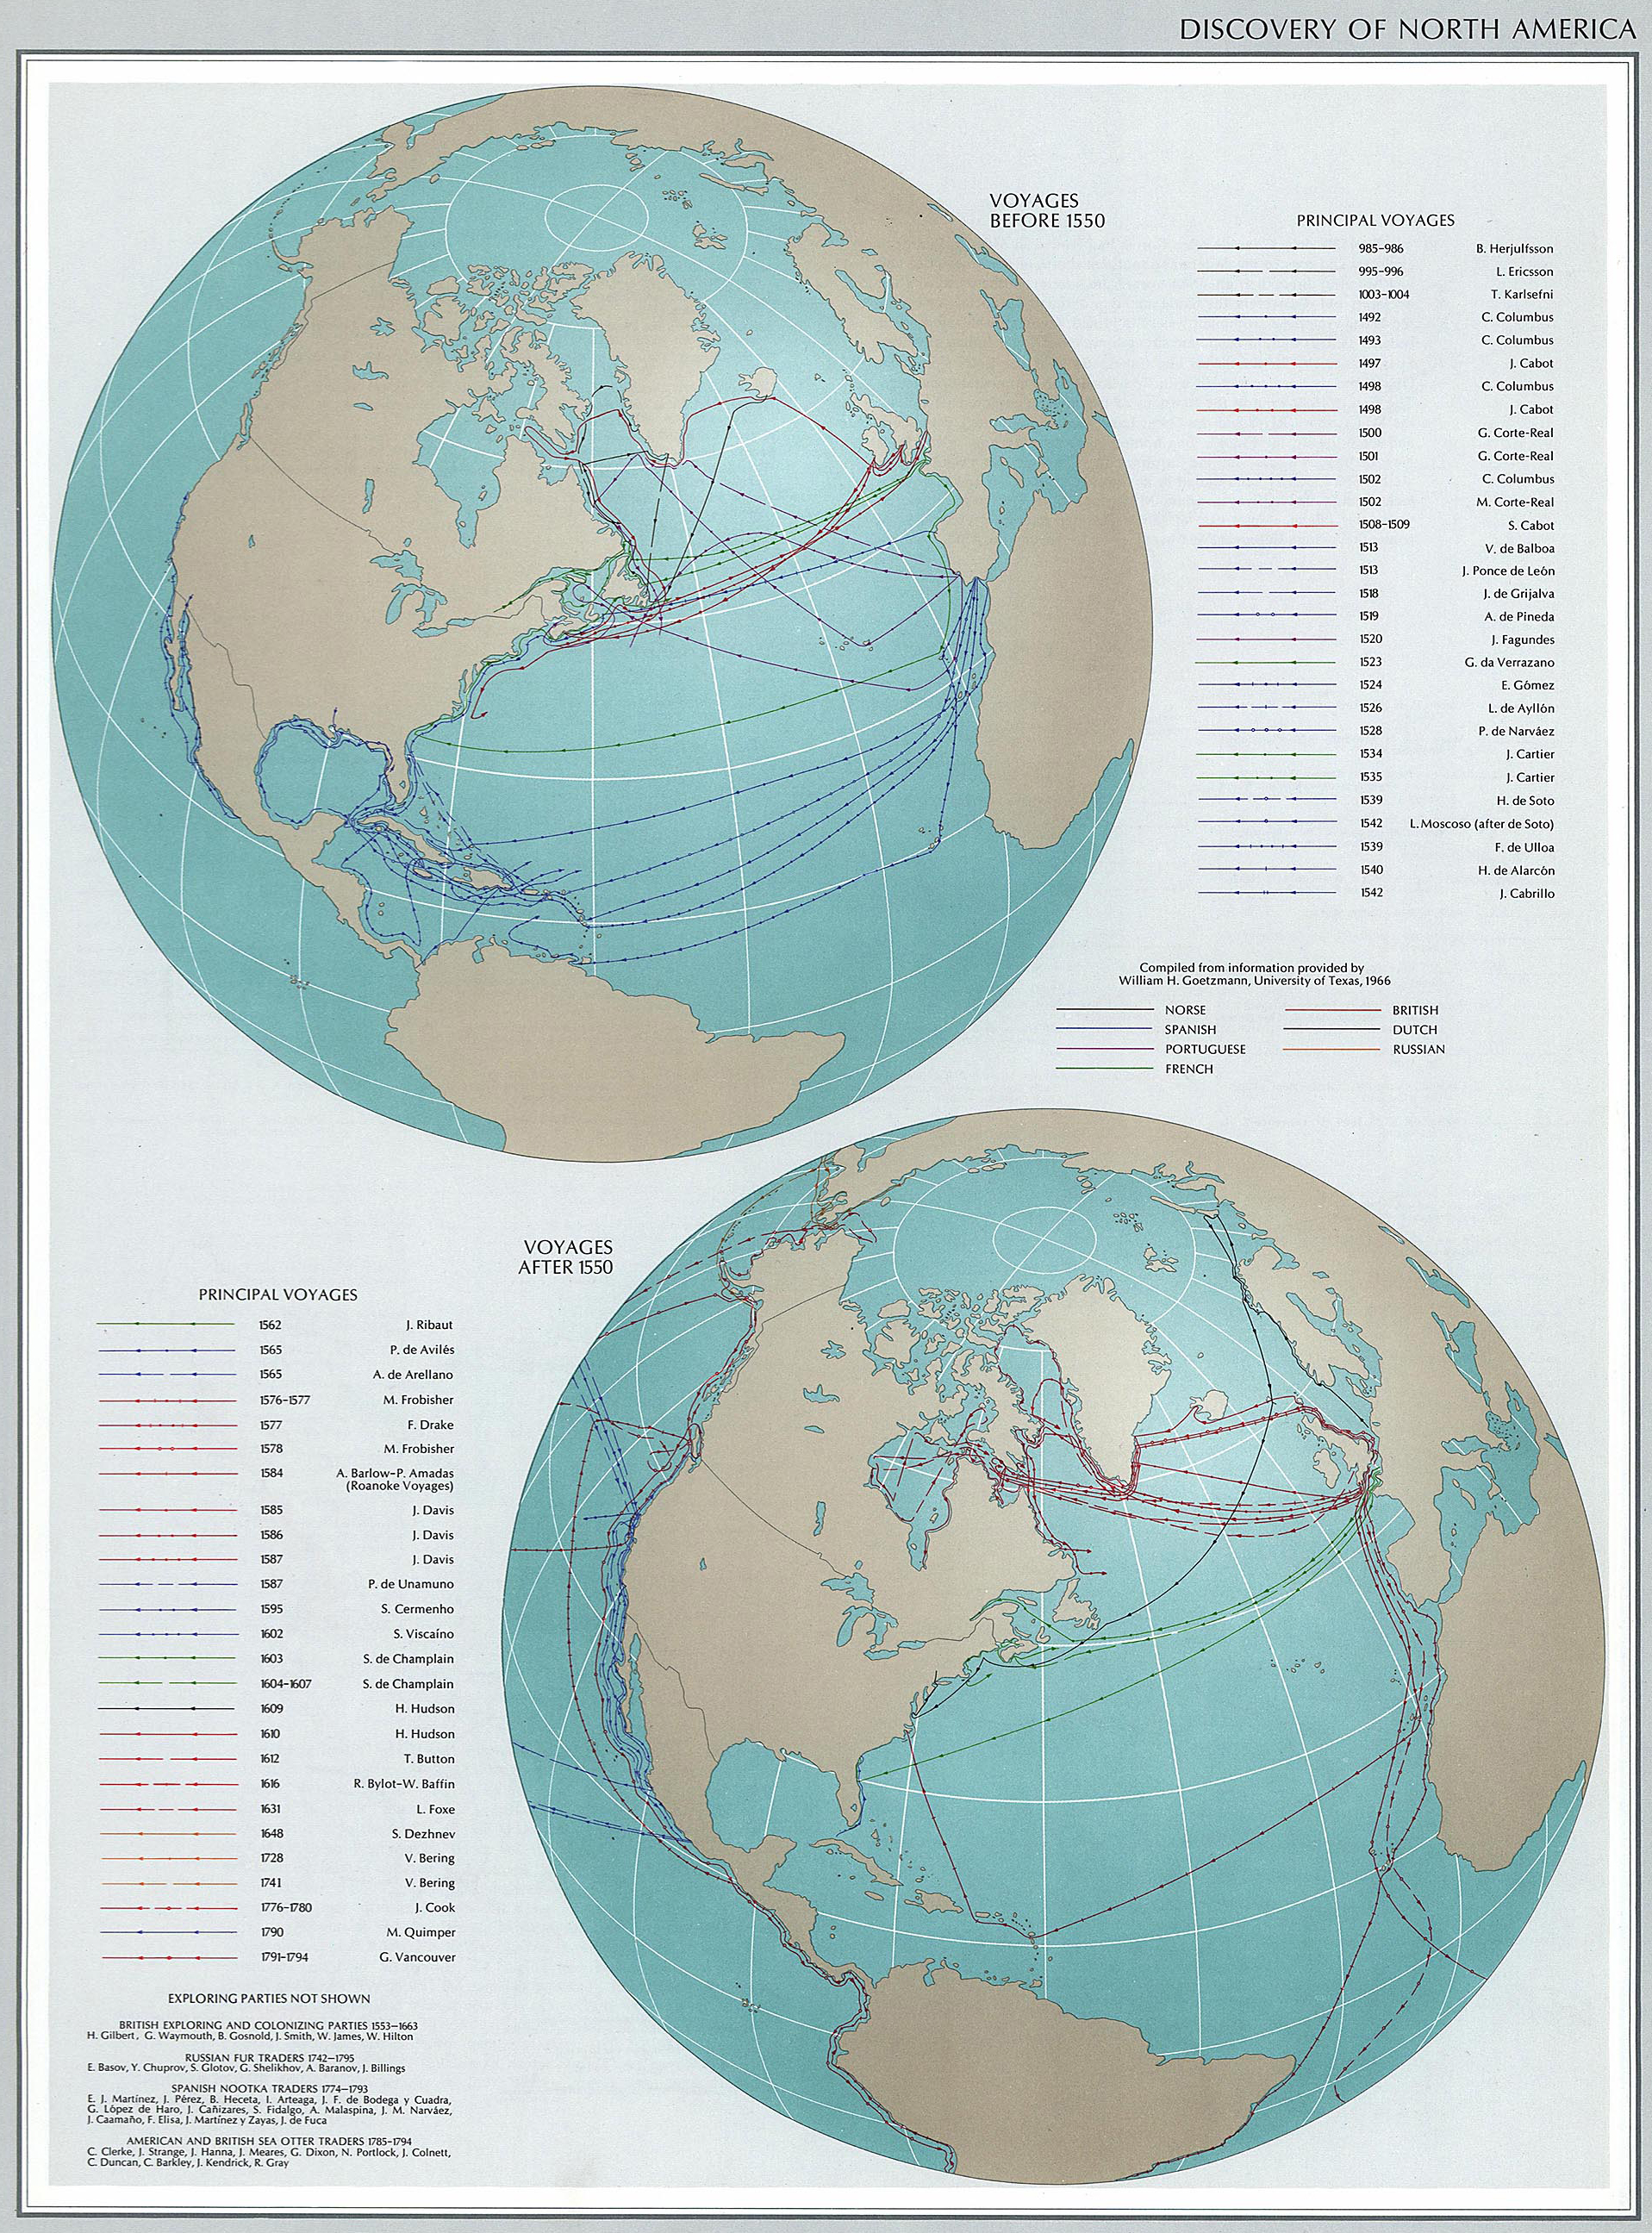 Map of the Discovery of North America. Voyages before and after 1550